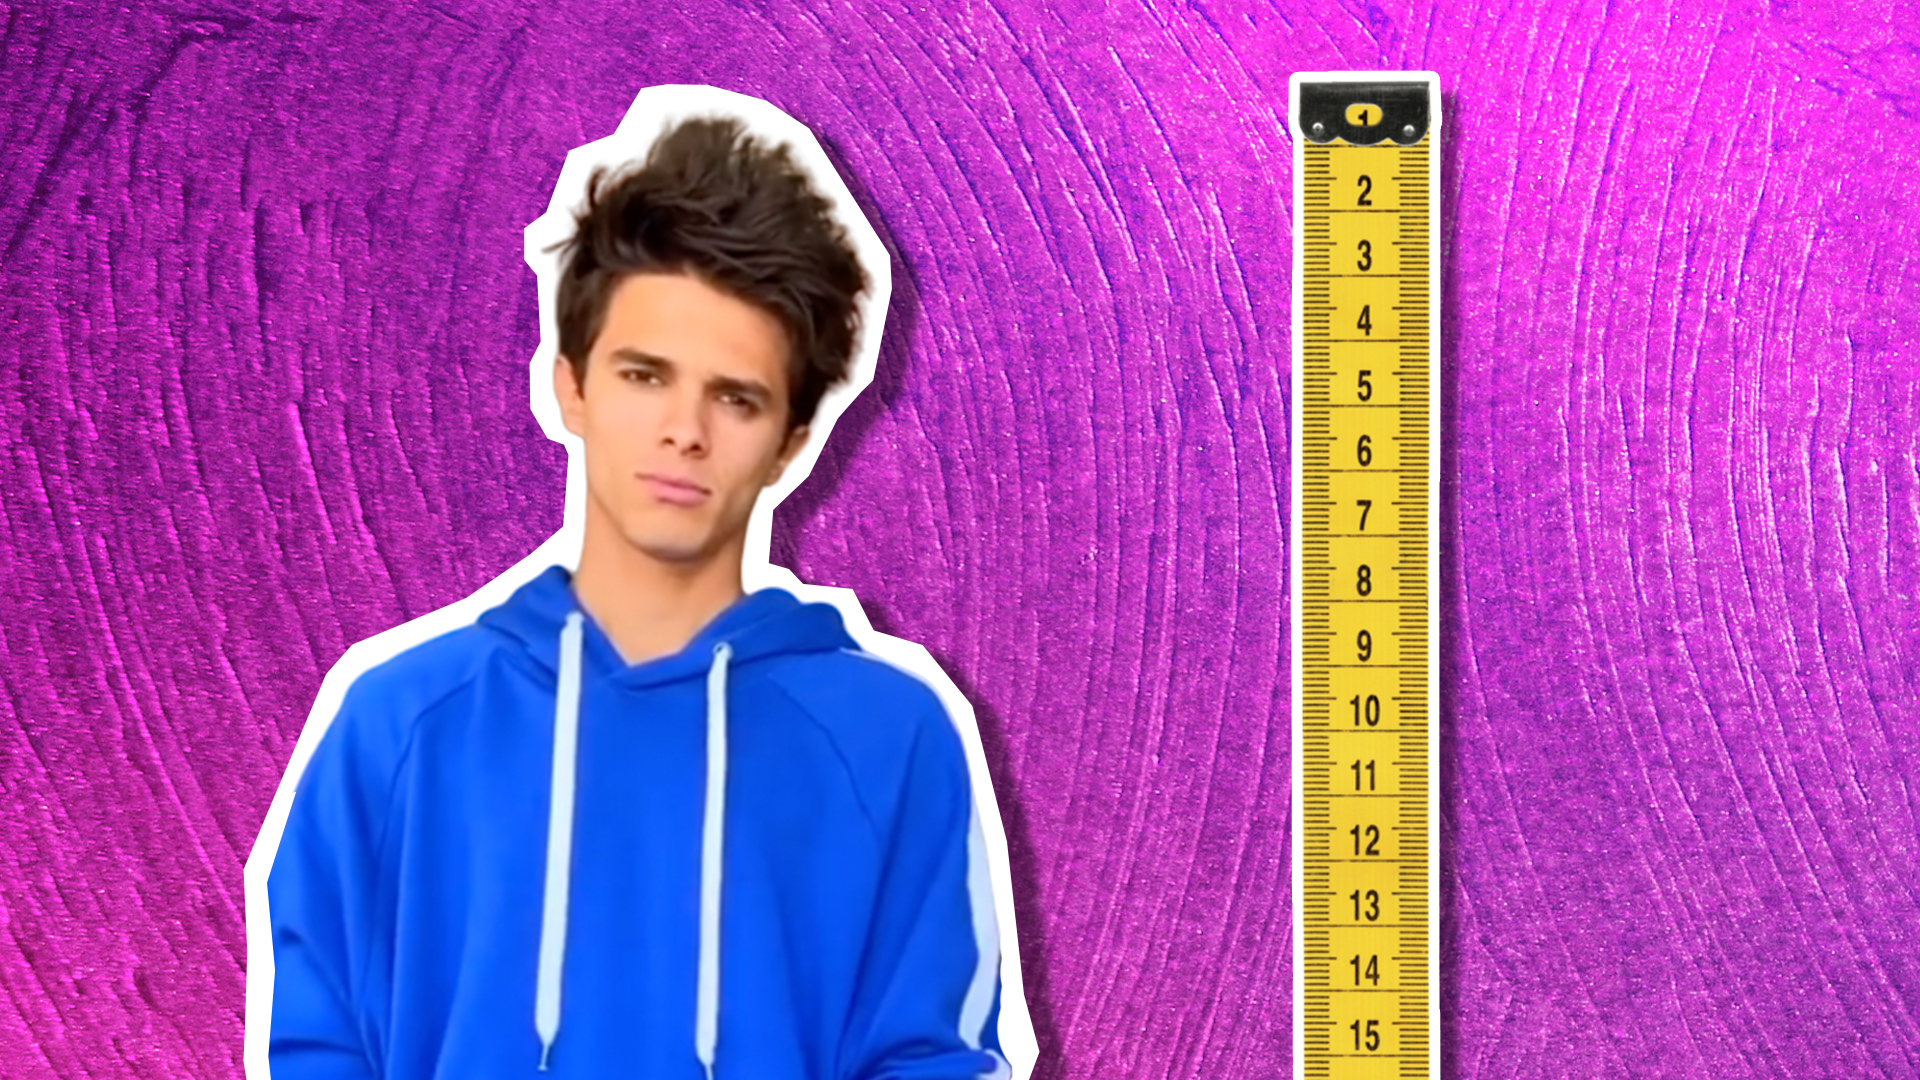 Brent Rivera and a tape measure